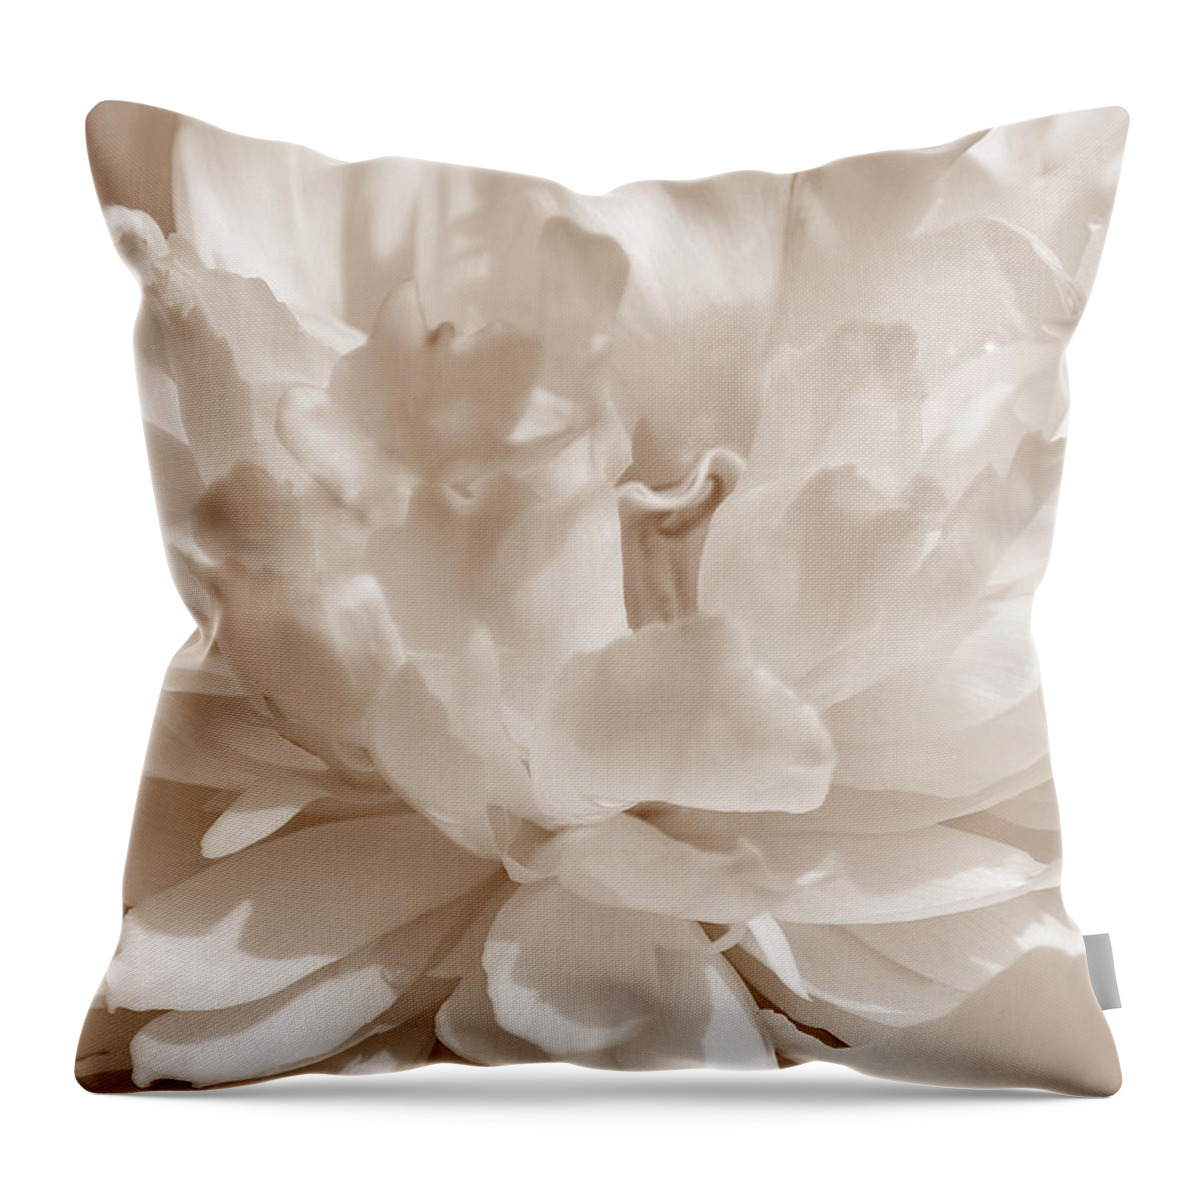 Art Throw Pillow featuring the photograph White Peony II Sepia by Joan Han